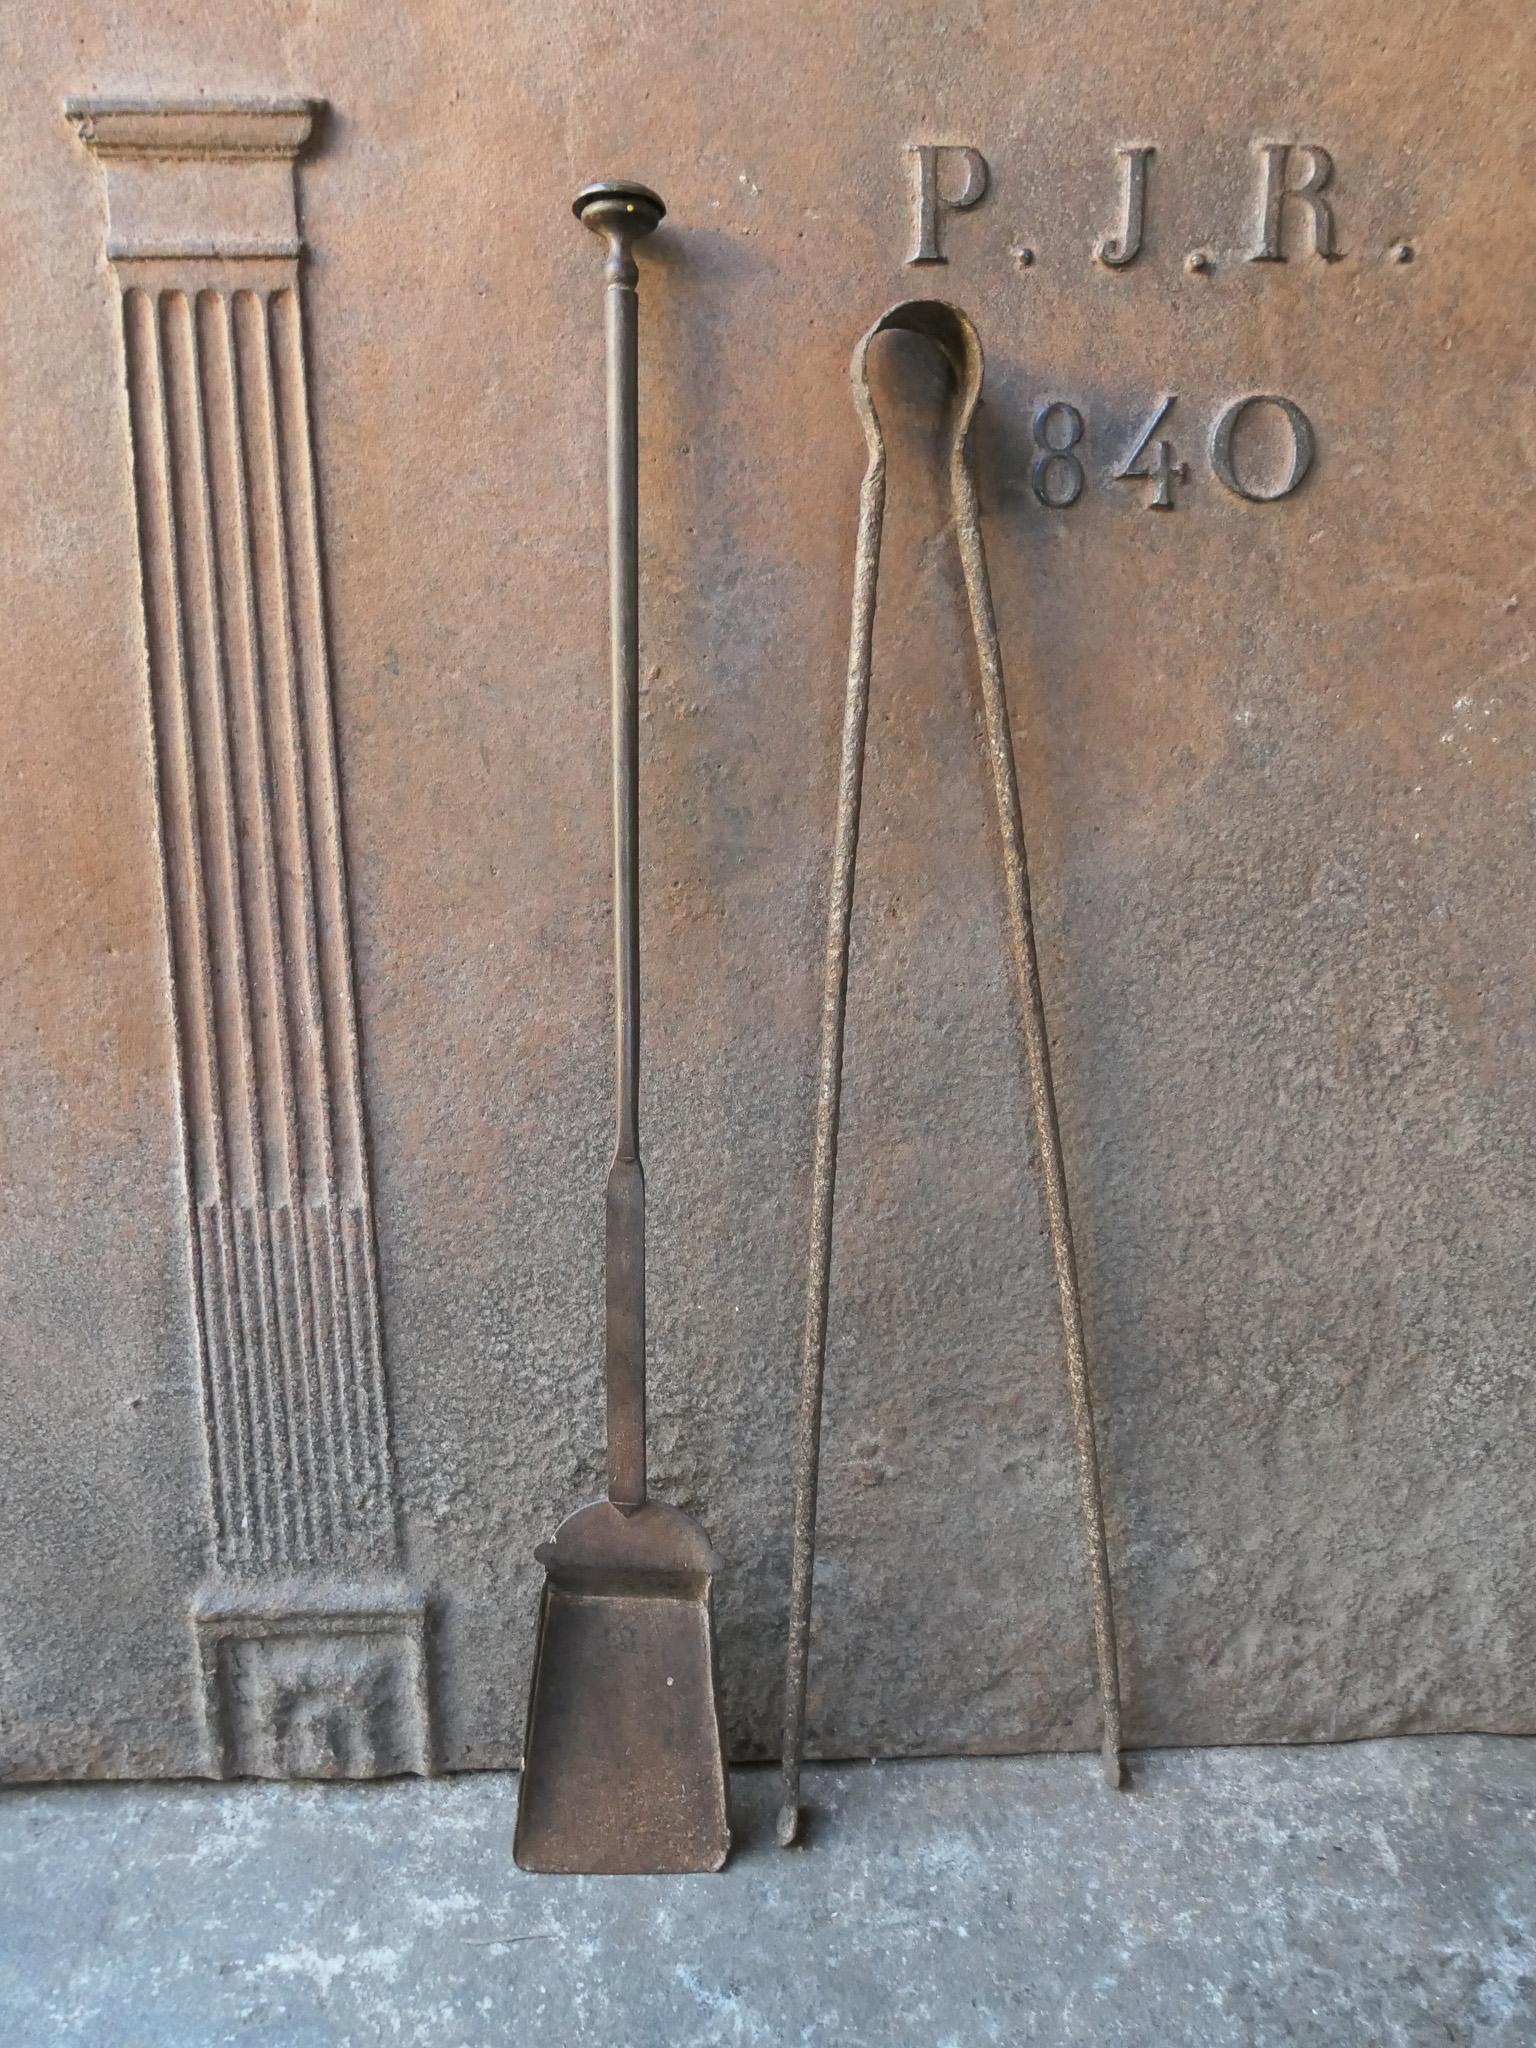 Rustic 18th-19th century French fireplace tool set. The tool set consists of fireplace tongs and a shovel. The tools are made of wrought iron. The set is in a good condition and fit for use in the fireplace.